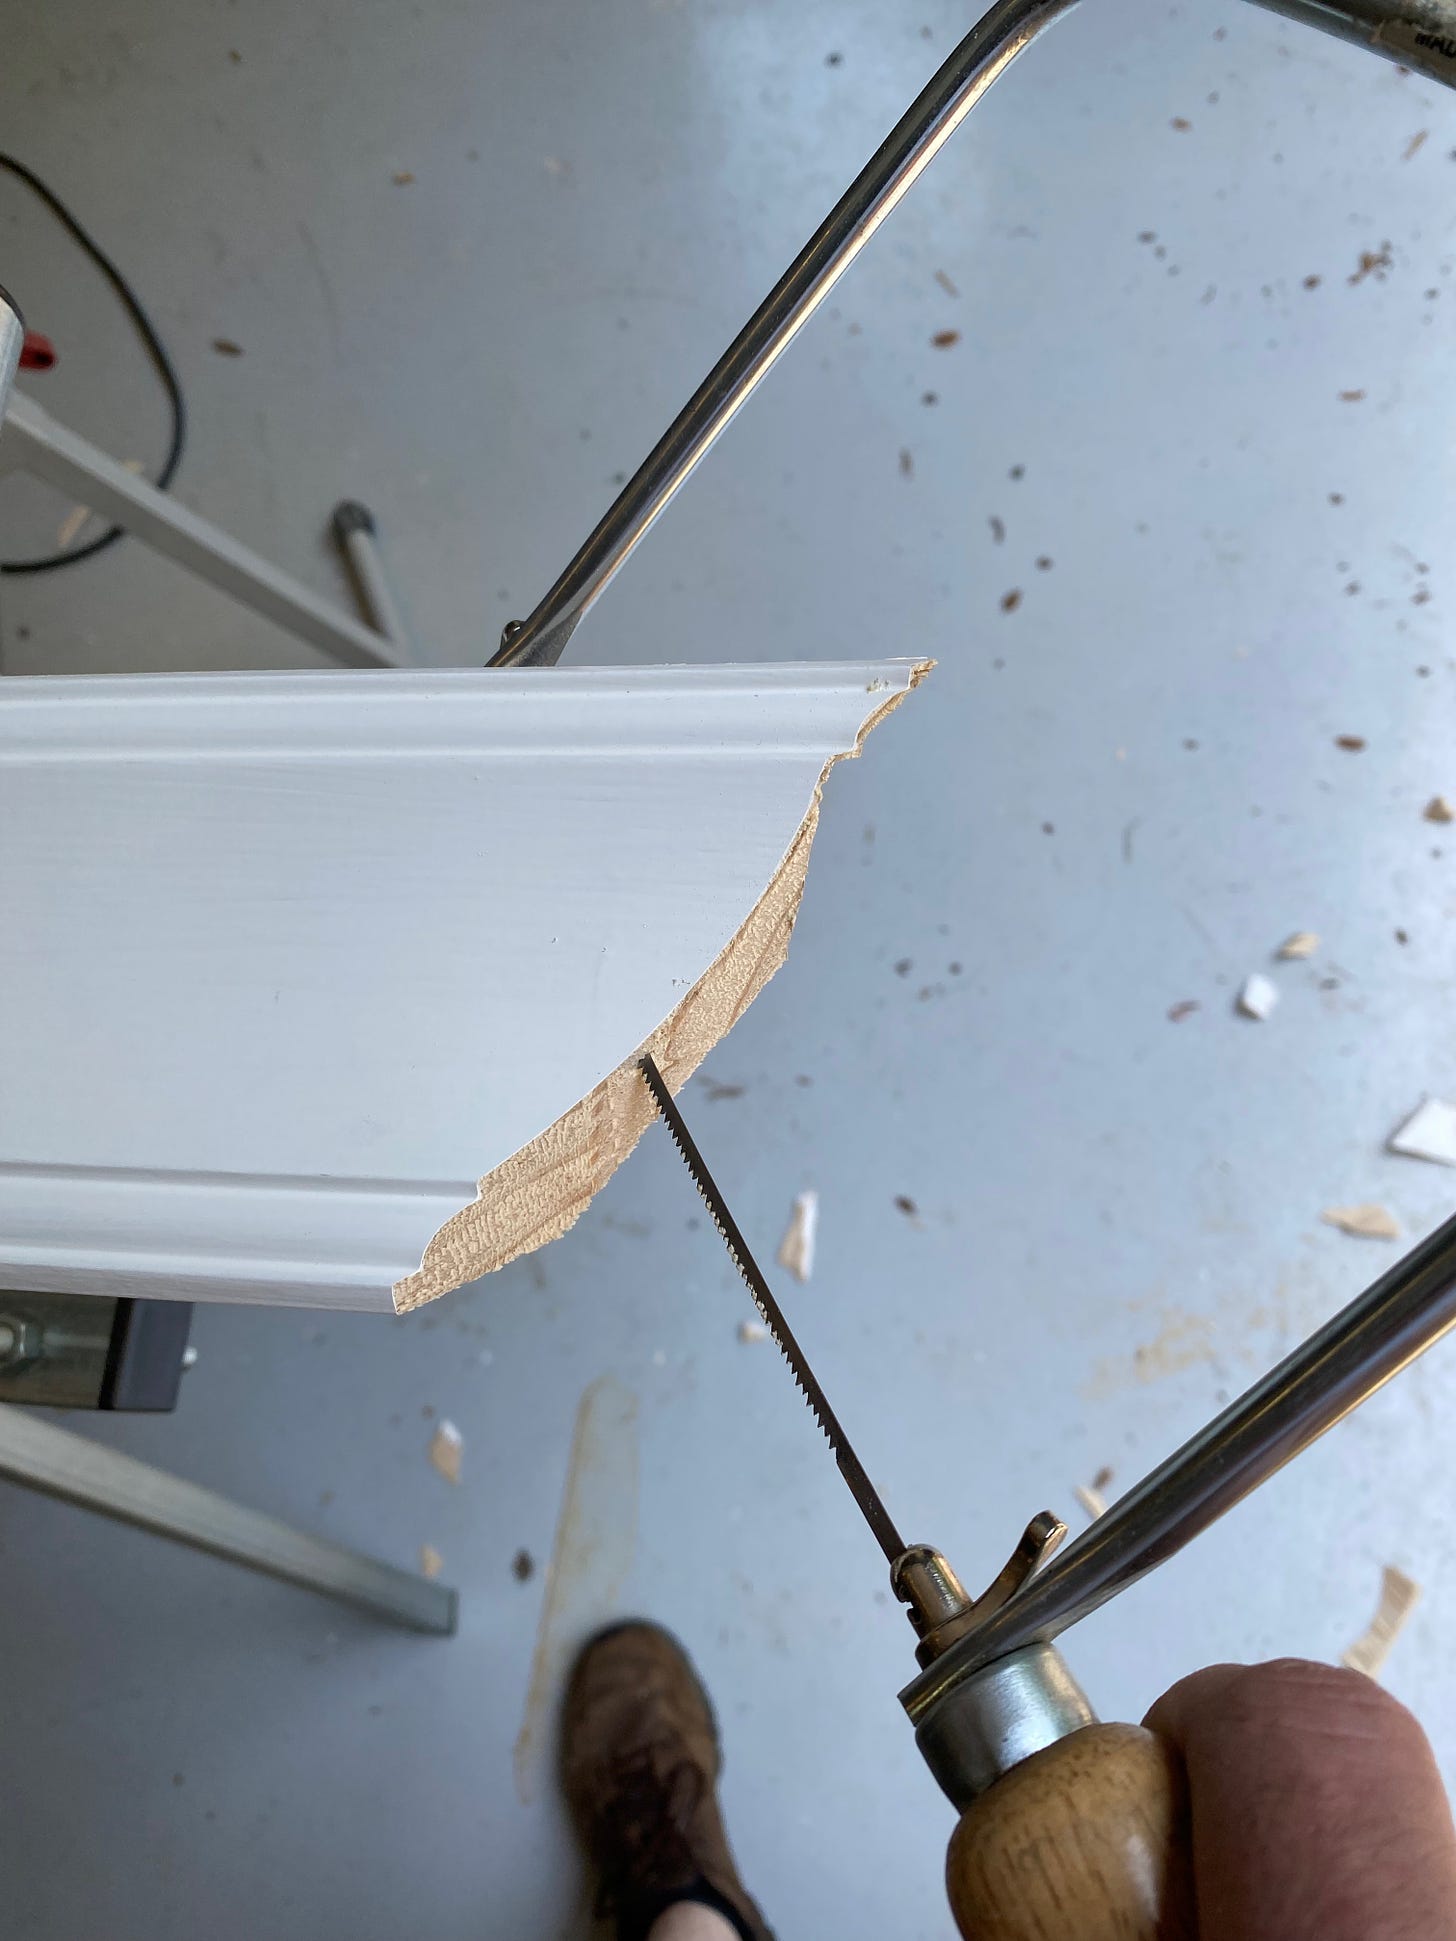 Coping the end of the crown molding